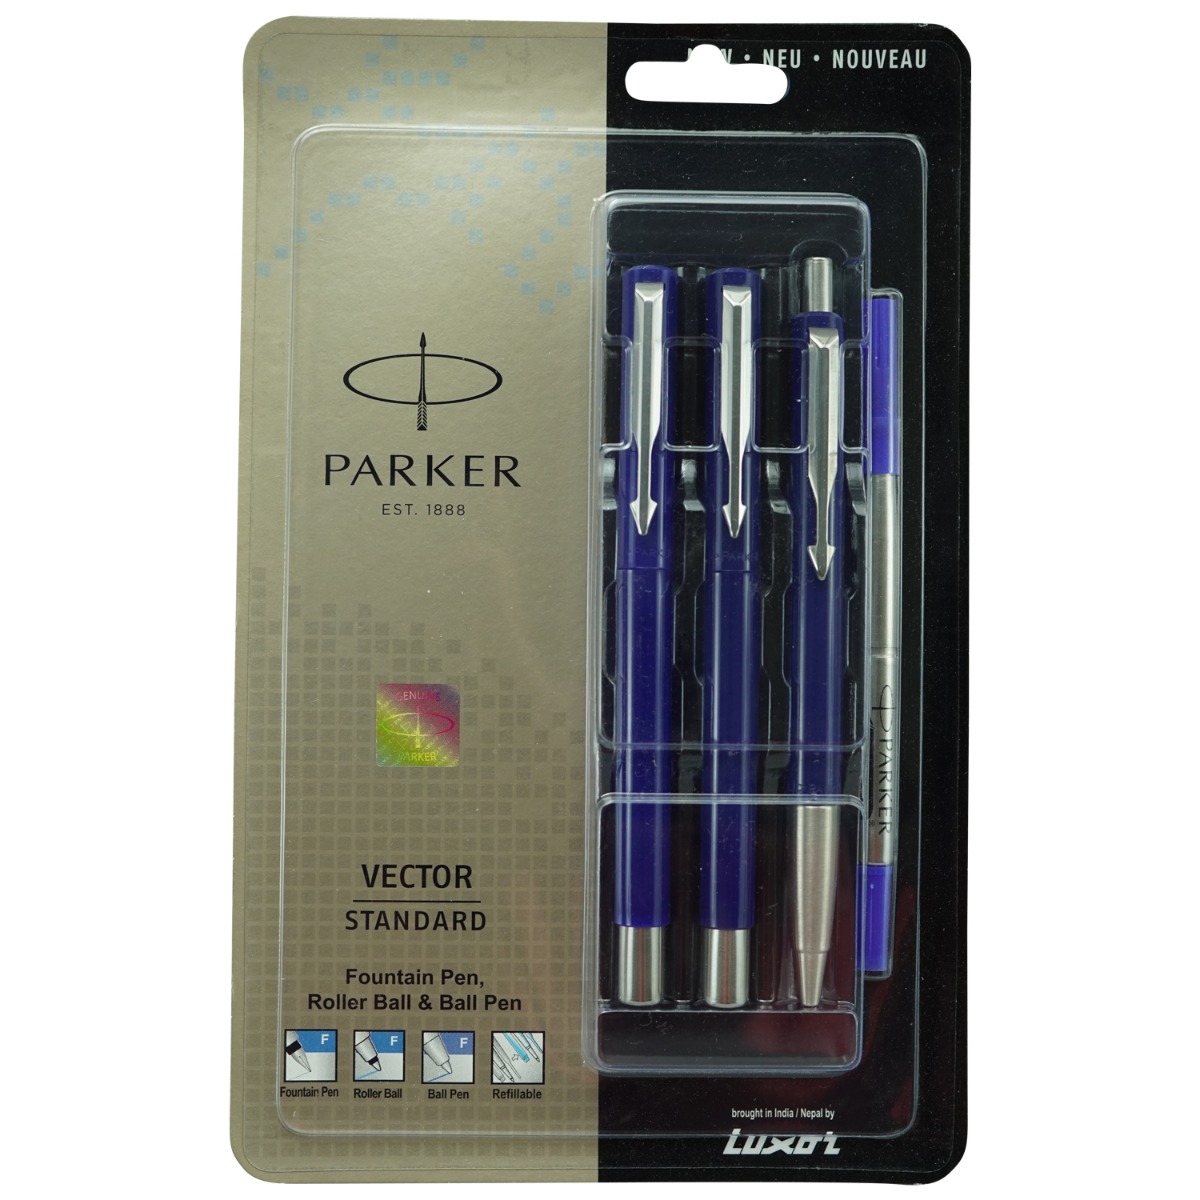 Parker Vector Standard Model:16072  Blue Color Body With Silver  Clip Fountain and Roller Ball and Ball Set Pen